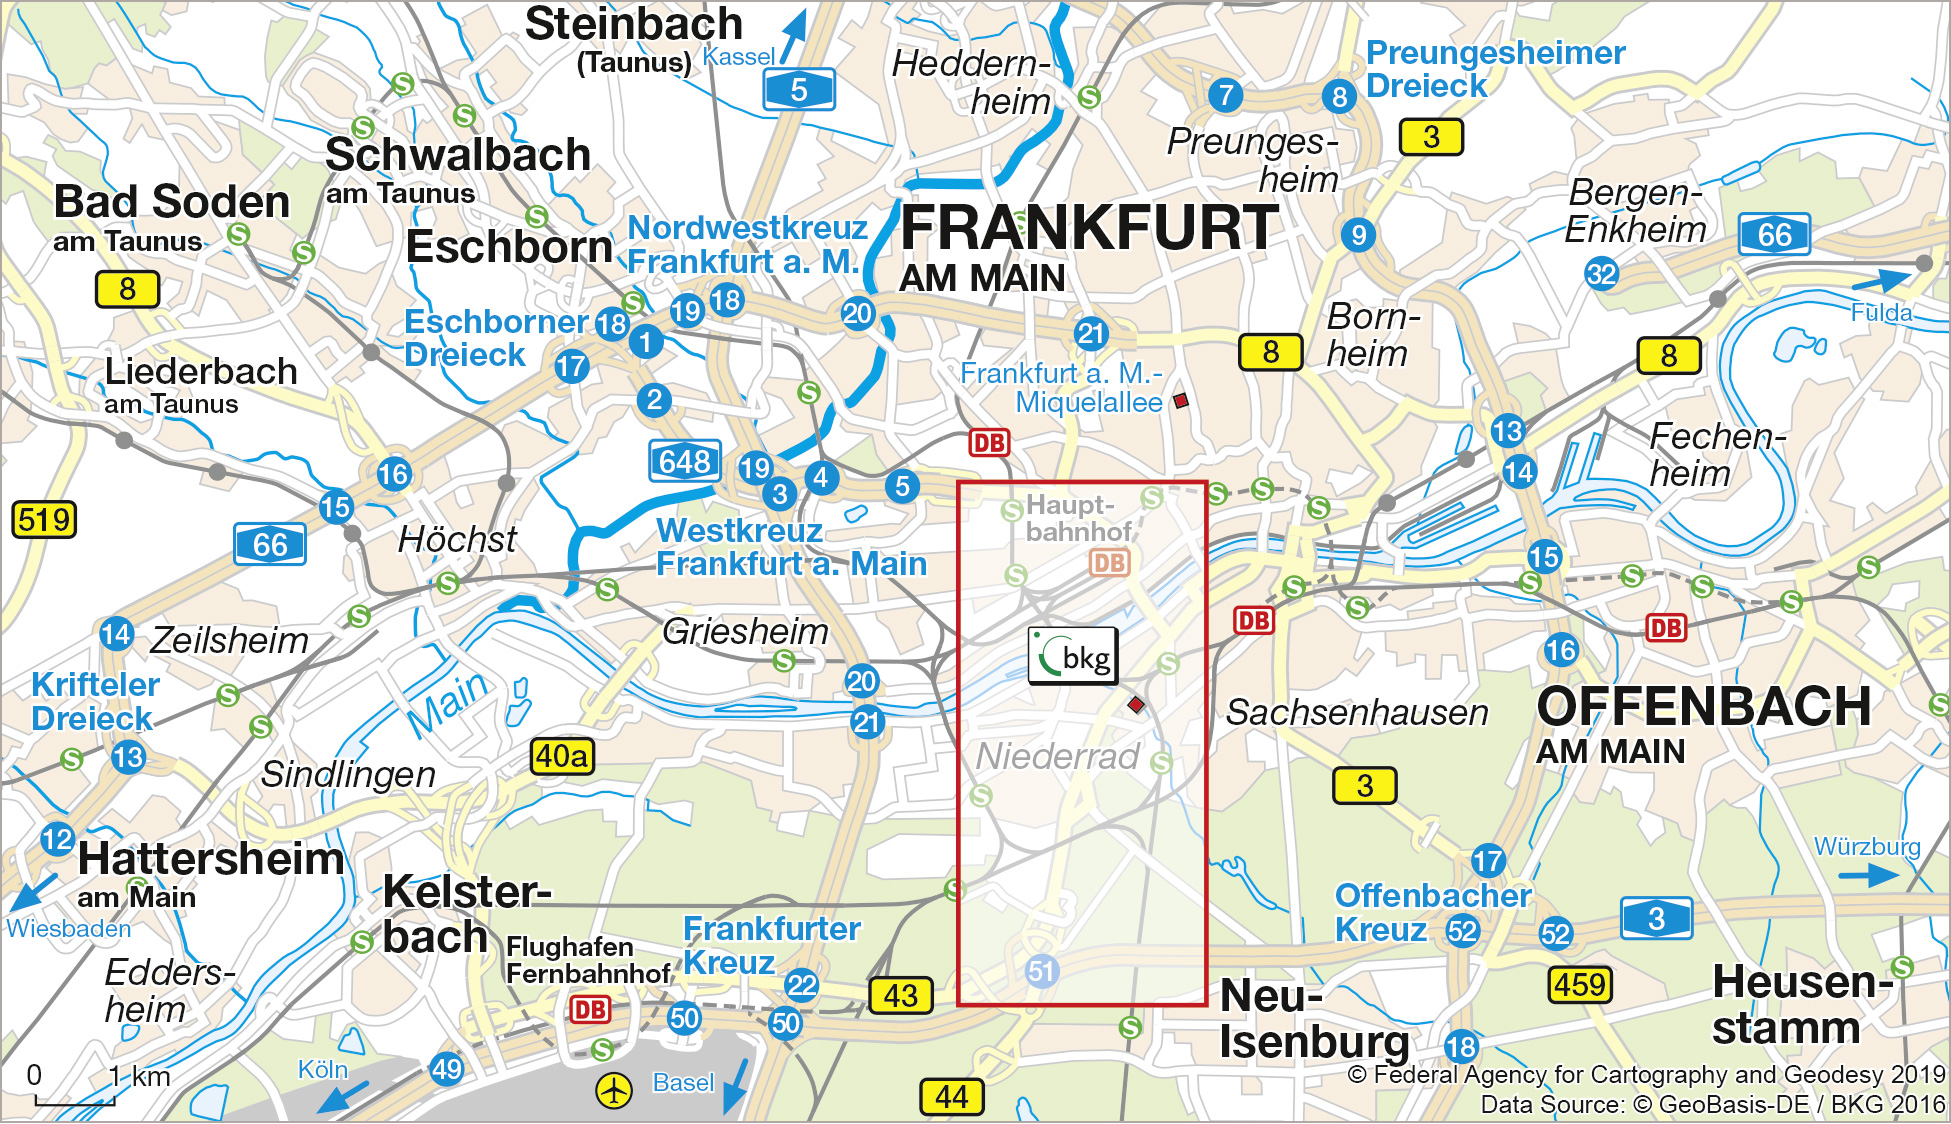 Image shows the location of the Central Office Frankfurt on a general map